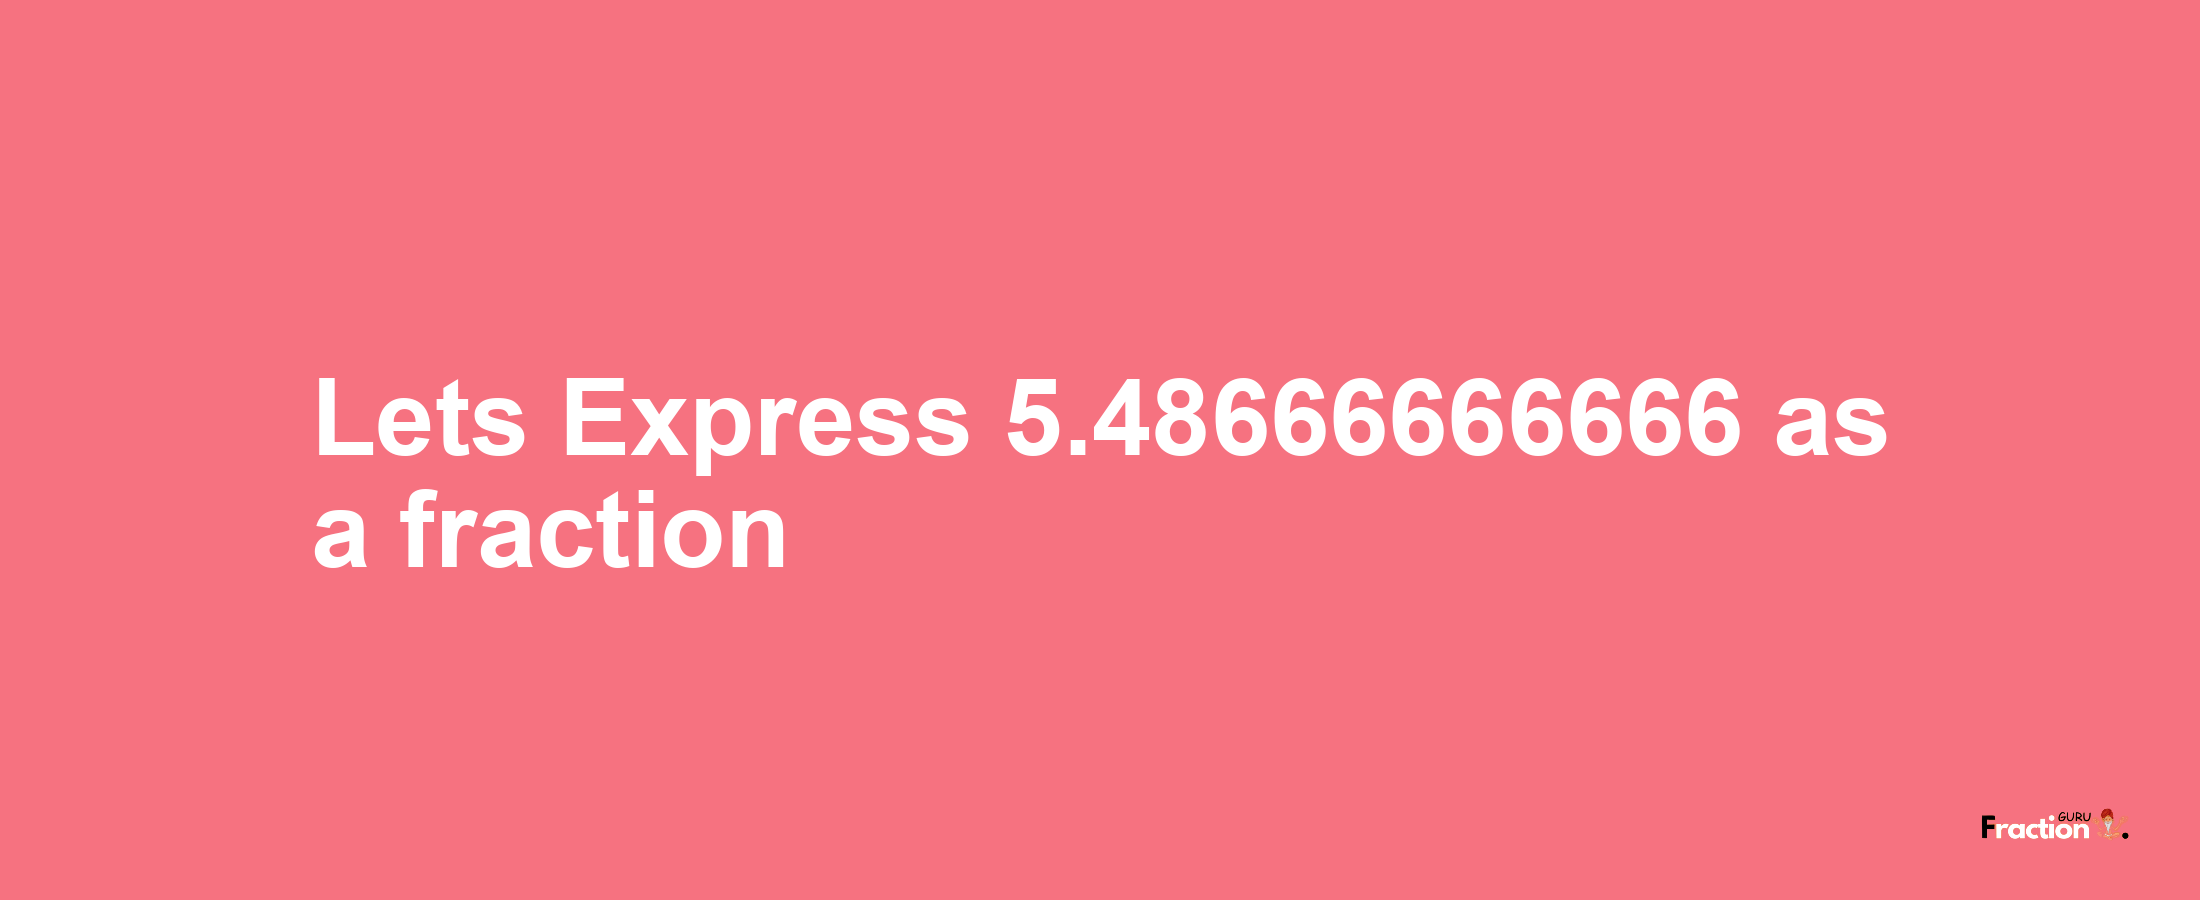 Lets Express 5.48666666666 as afraction